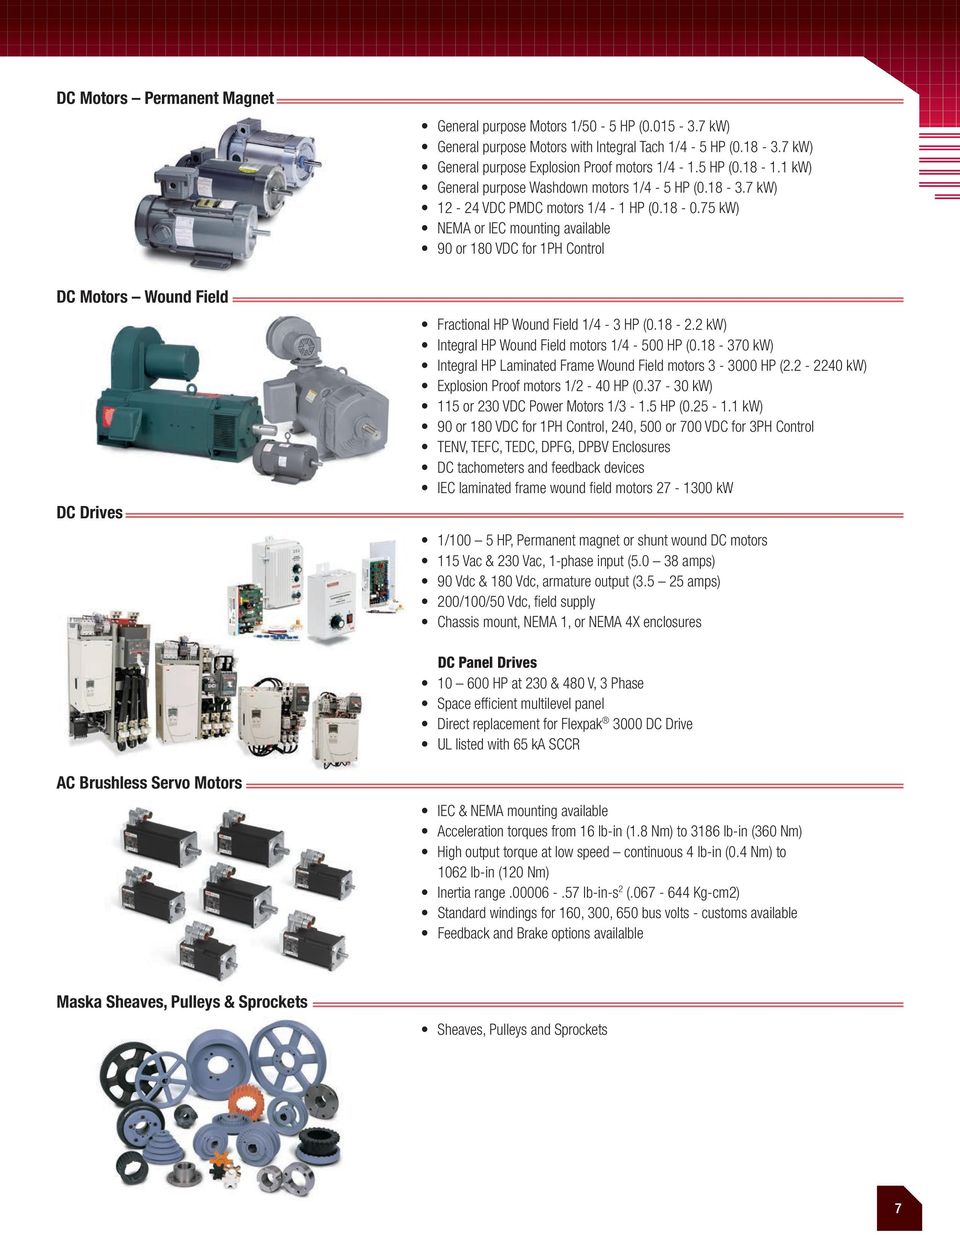 75 kw) NEMA or IEC mounting available 90 or 180 VDC for 1PH Control DC Motors Wound Field DC Drives Fractional HP Wound Field 1/4-3 HP (0.18-2.2 kw) Integral HP Wound Field motors 1/4-500 HP (0.